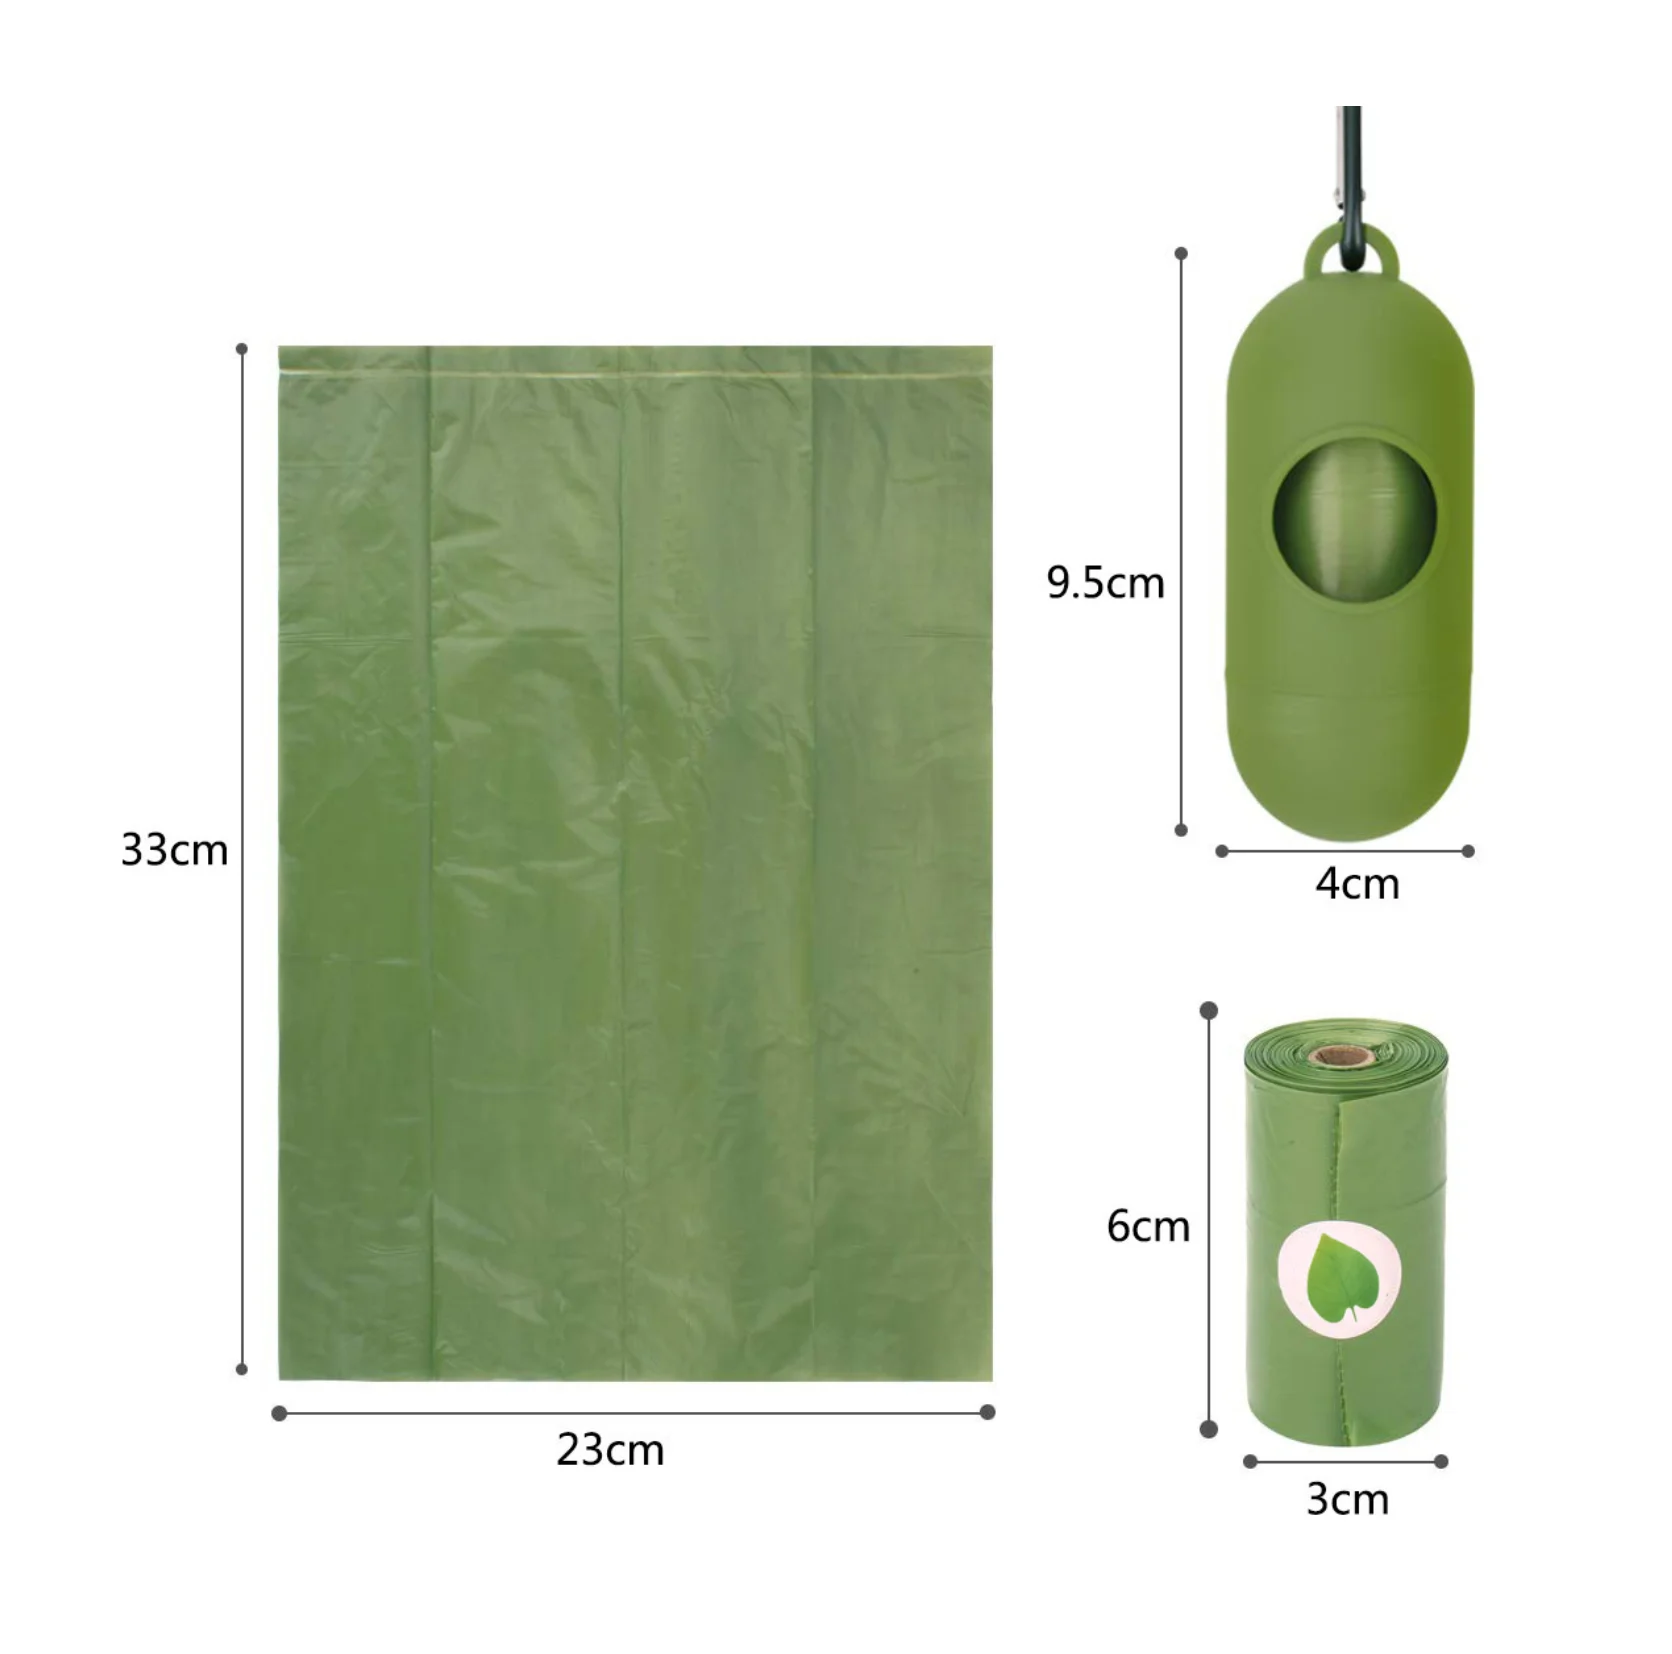 biodegradable compostable dog poop bags, disposable pet waste bags